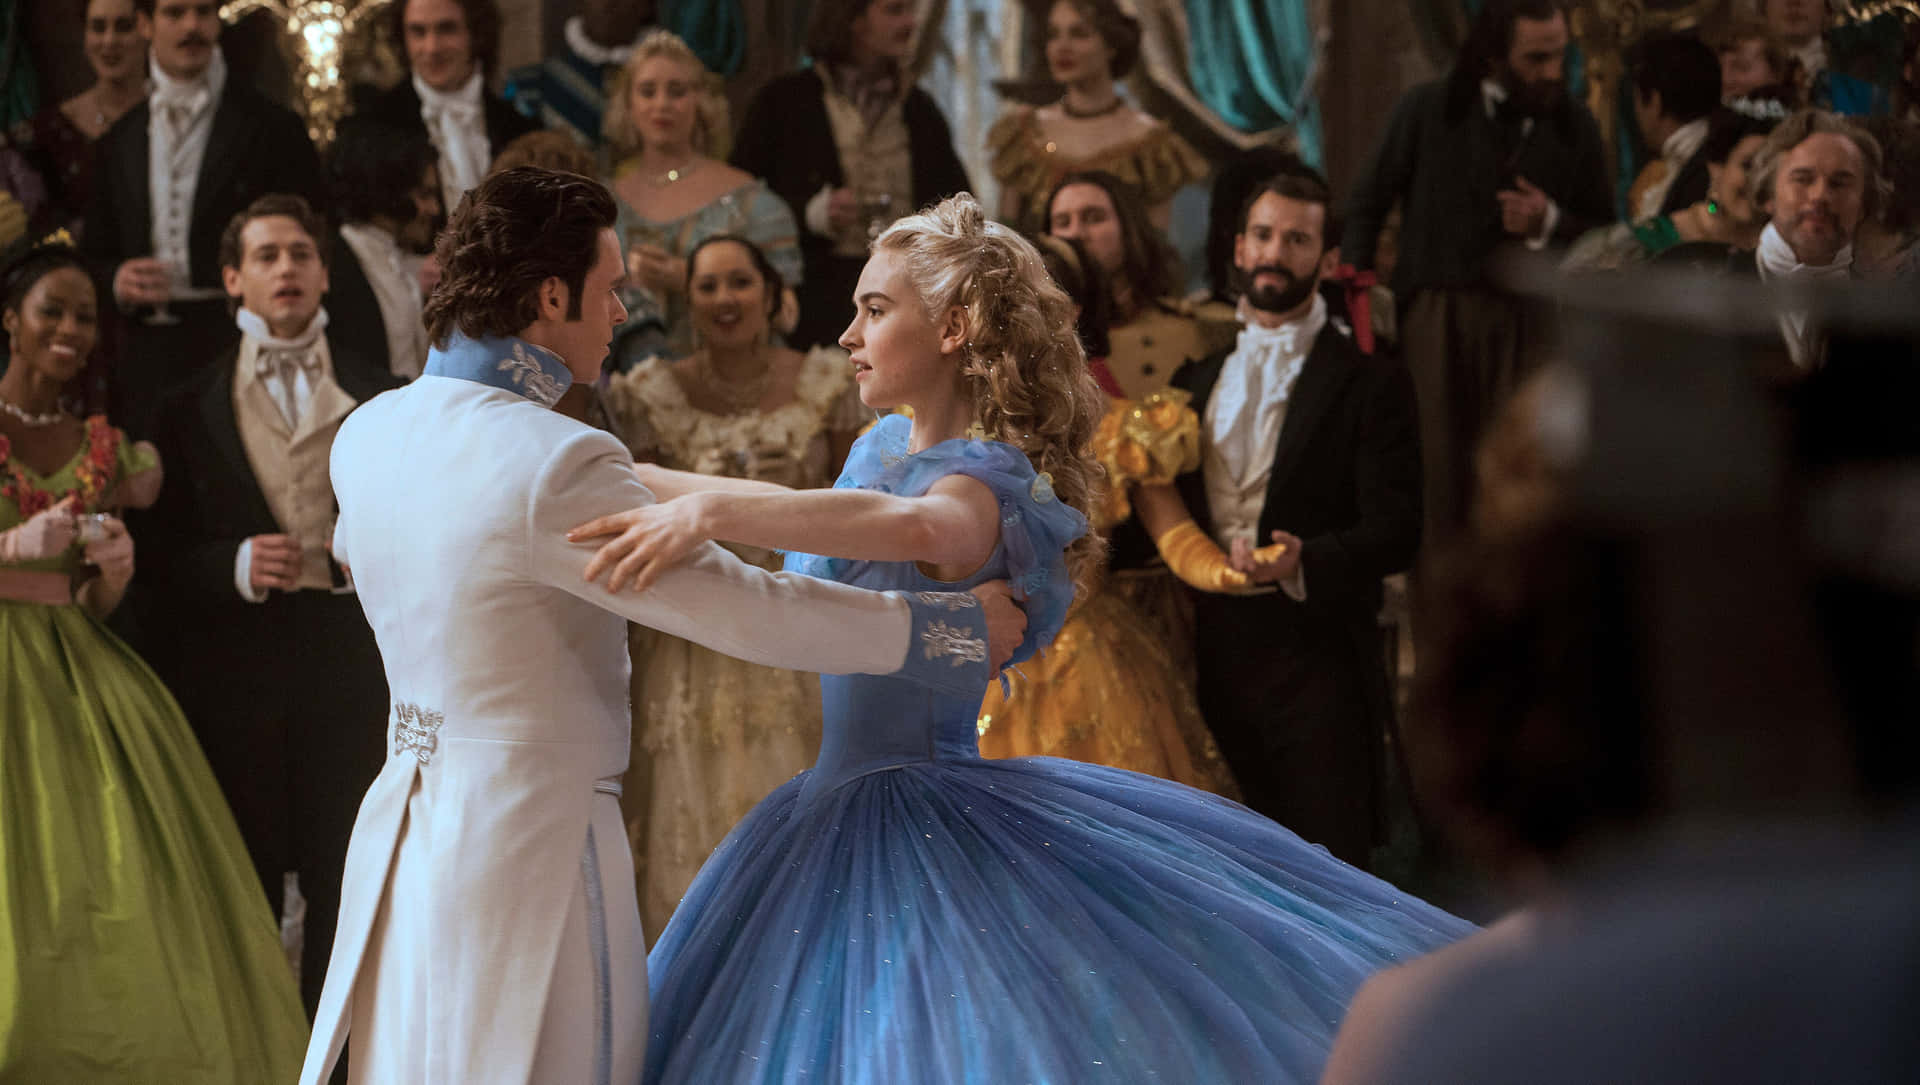 Get Ready for the Ball with Cinderella